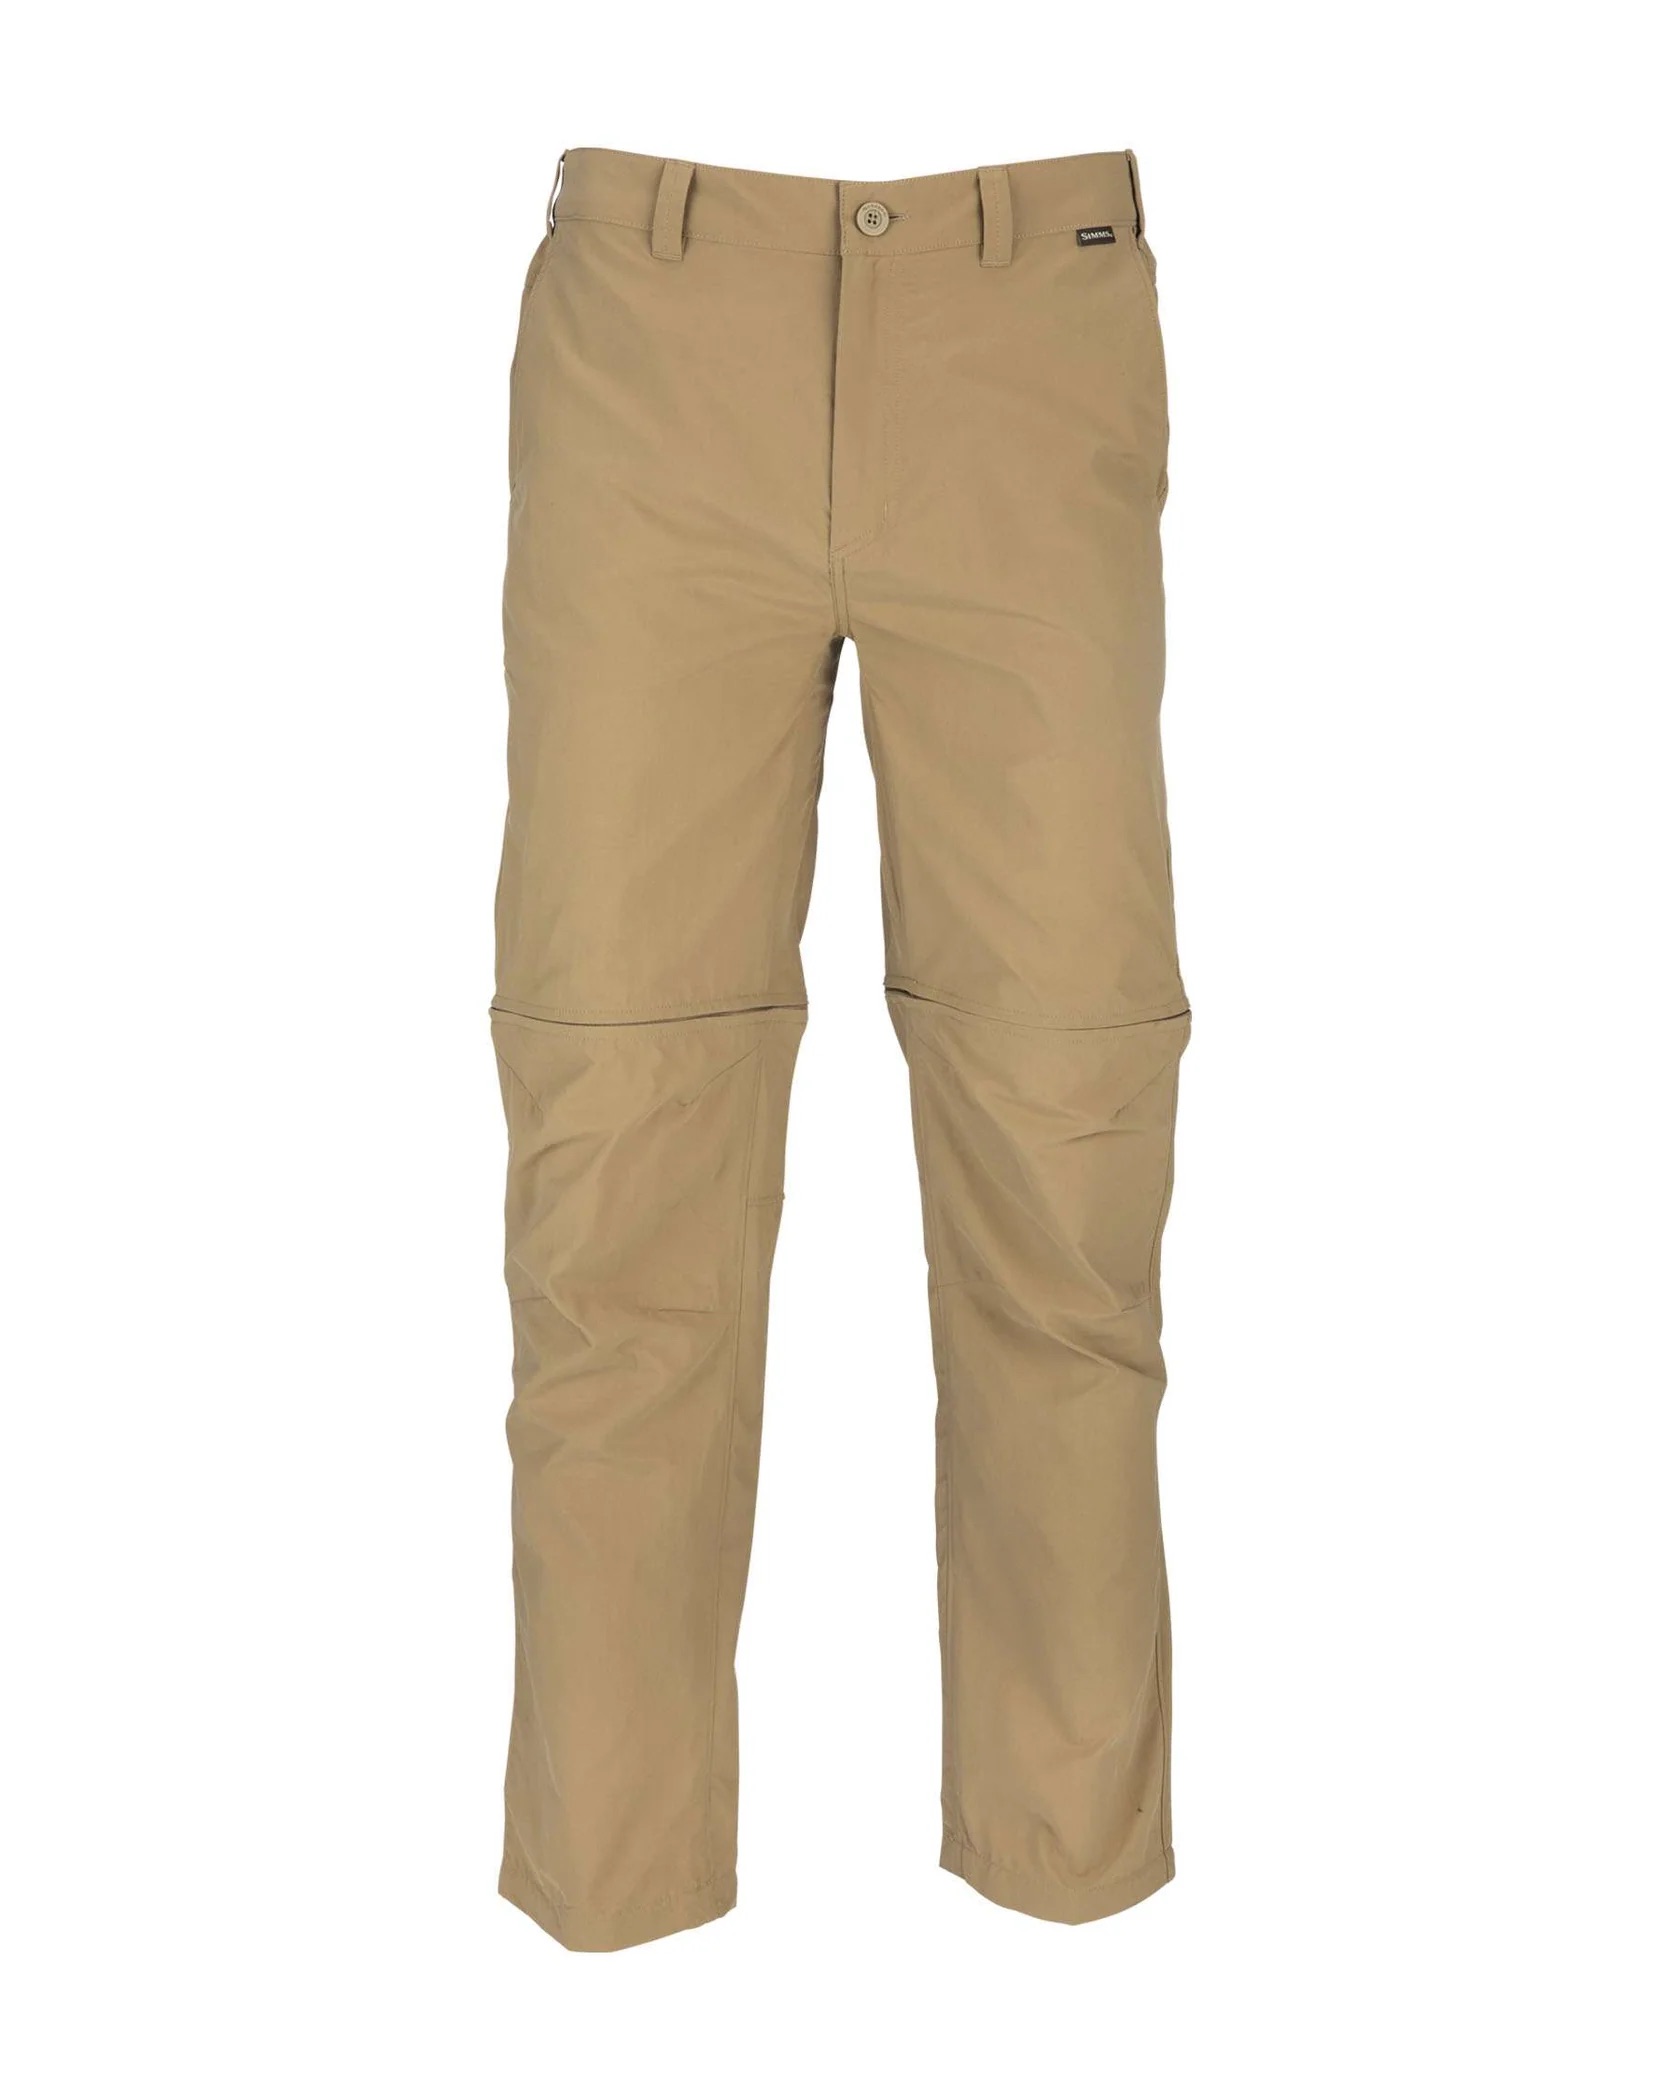 Simms M's Superlight Zip-Off Pants - Oyster - Large (36